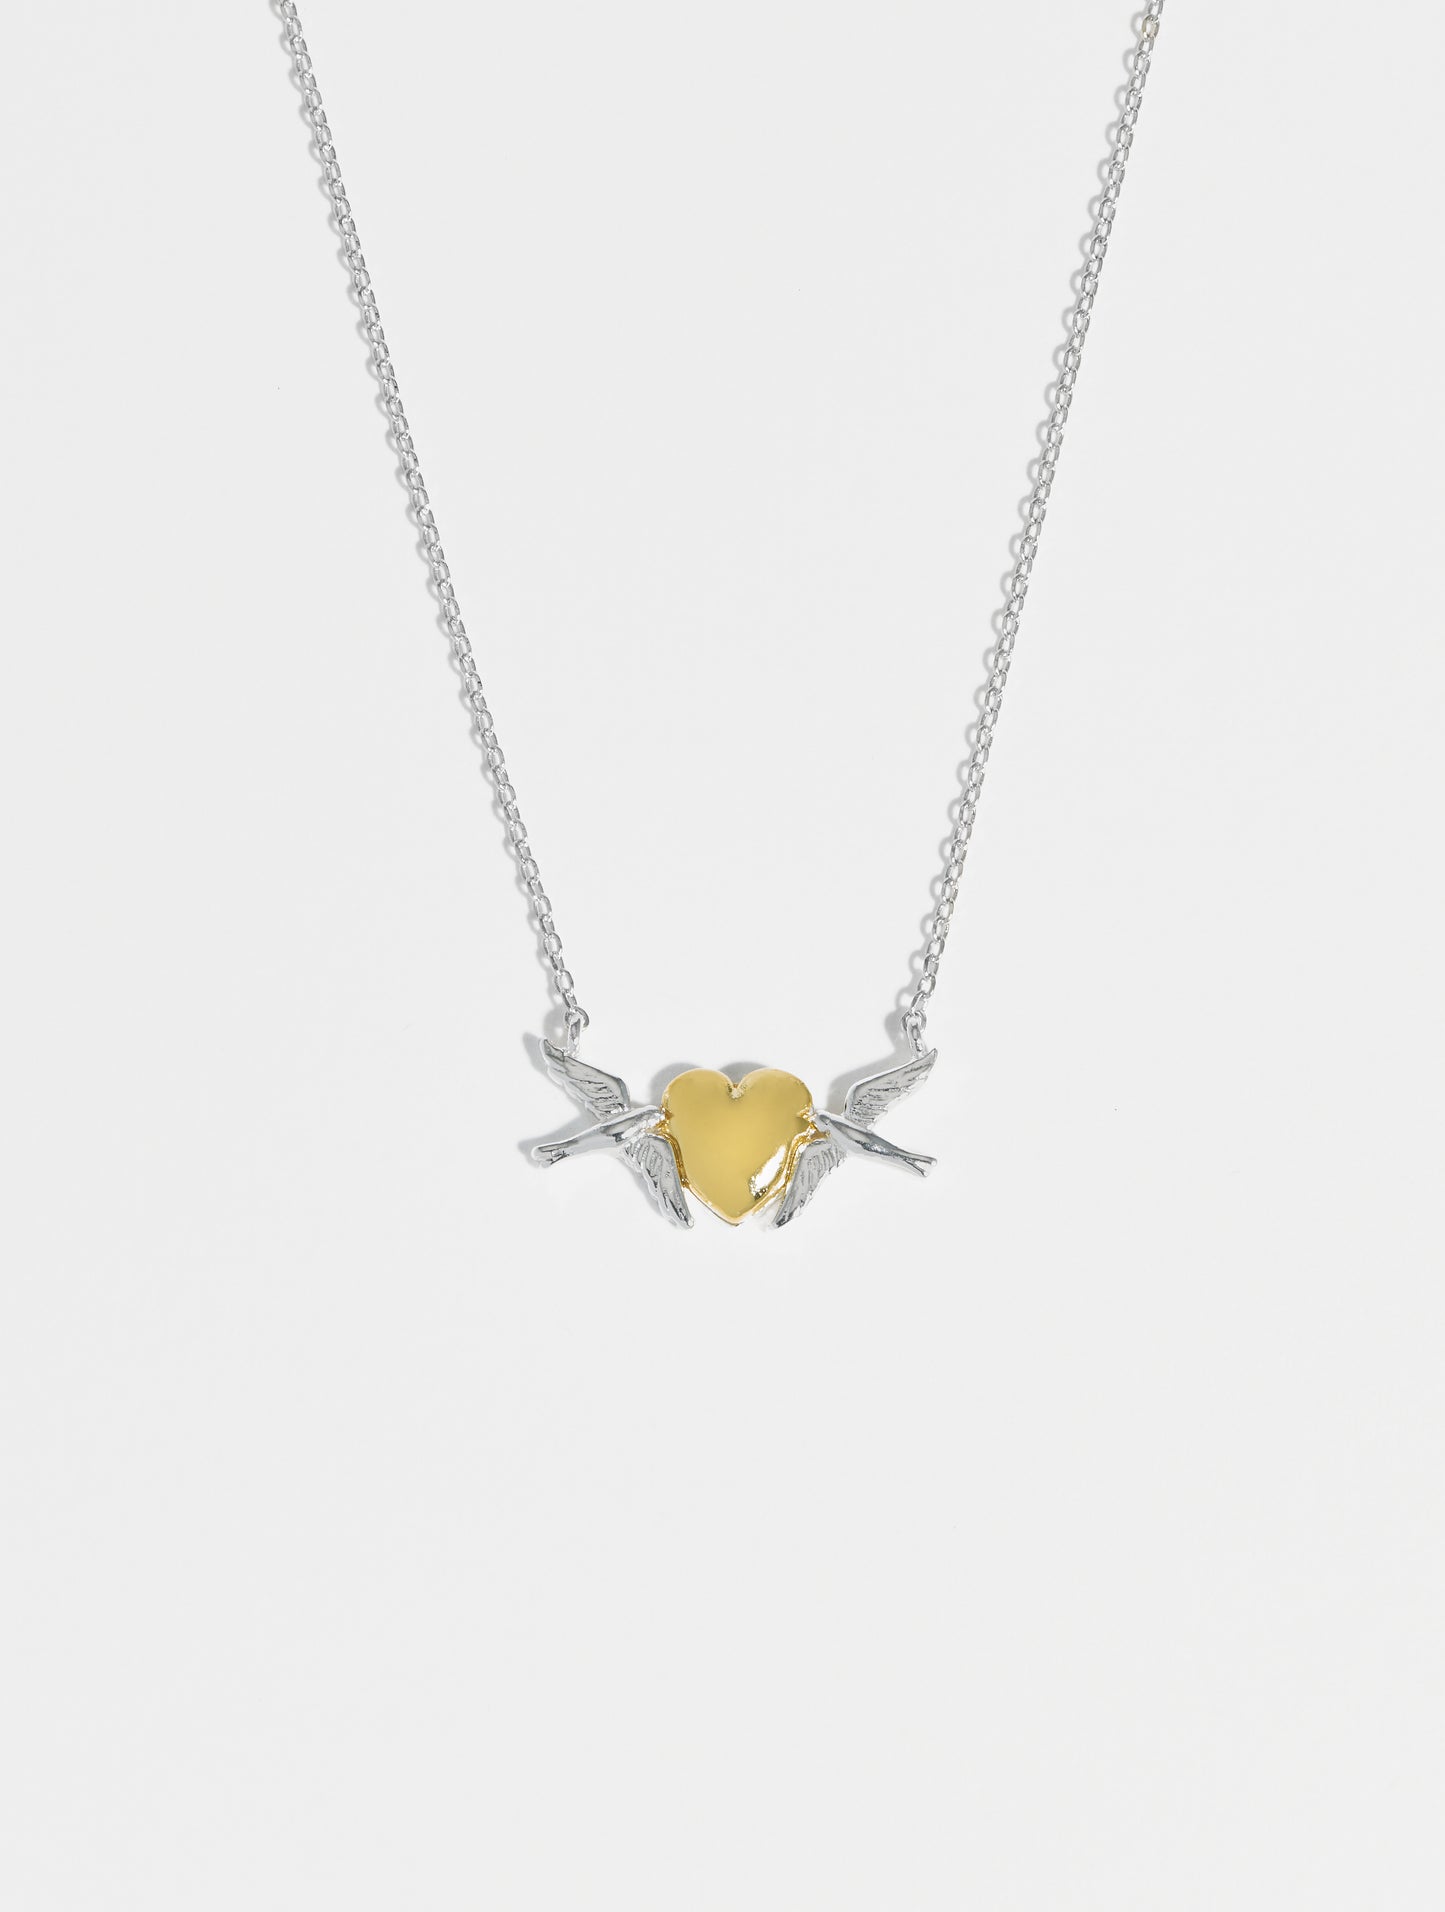 Birds and Heart Necklace